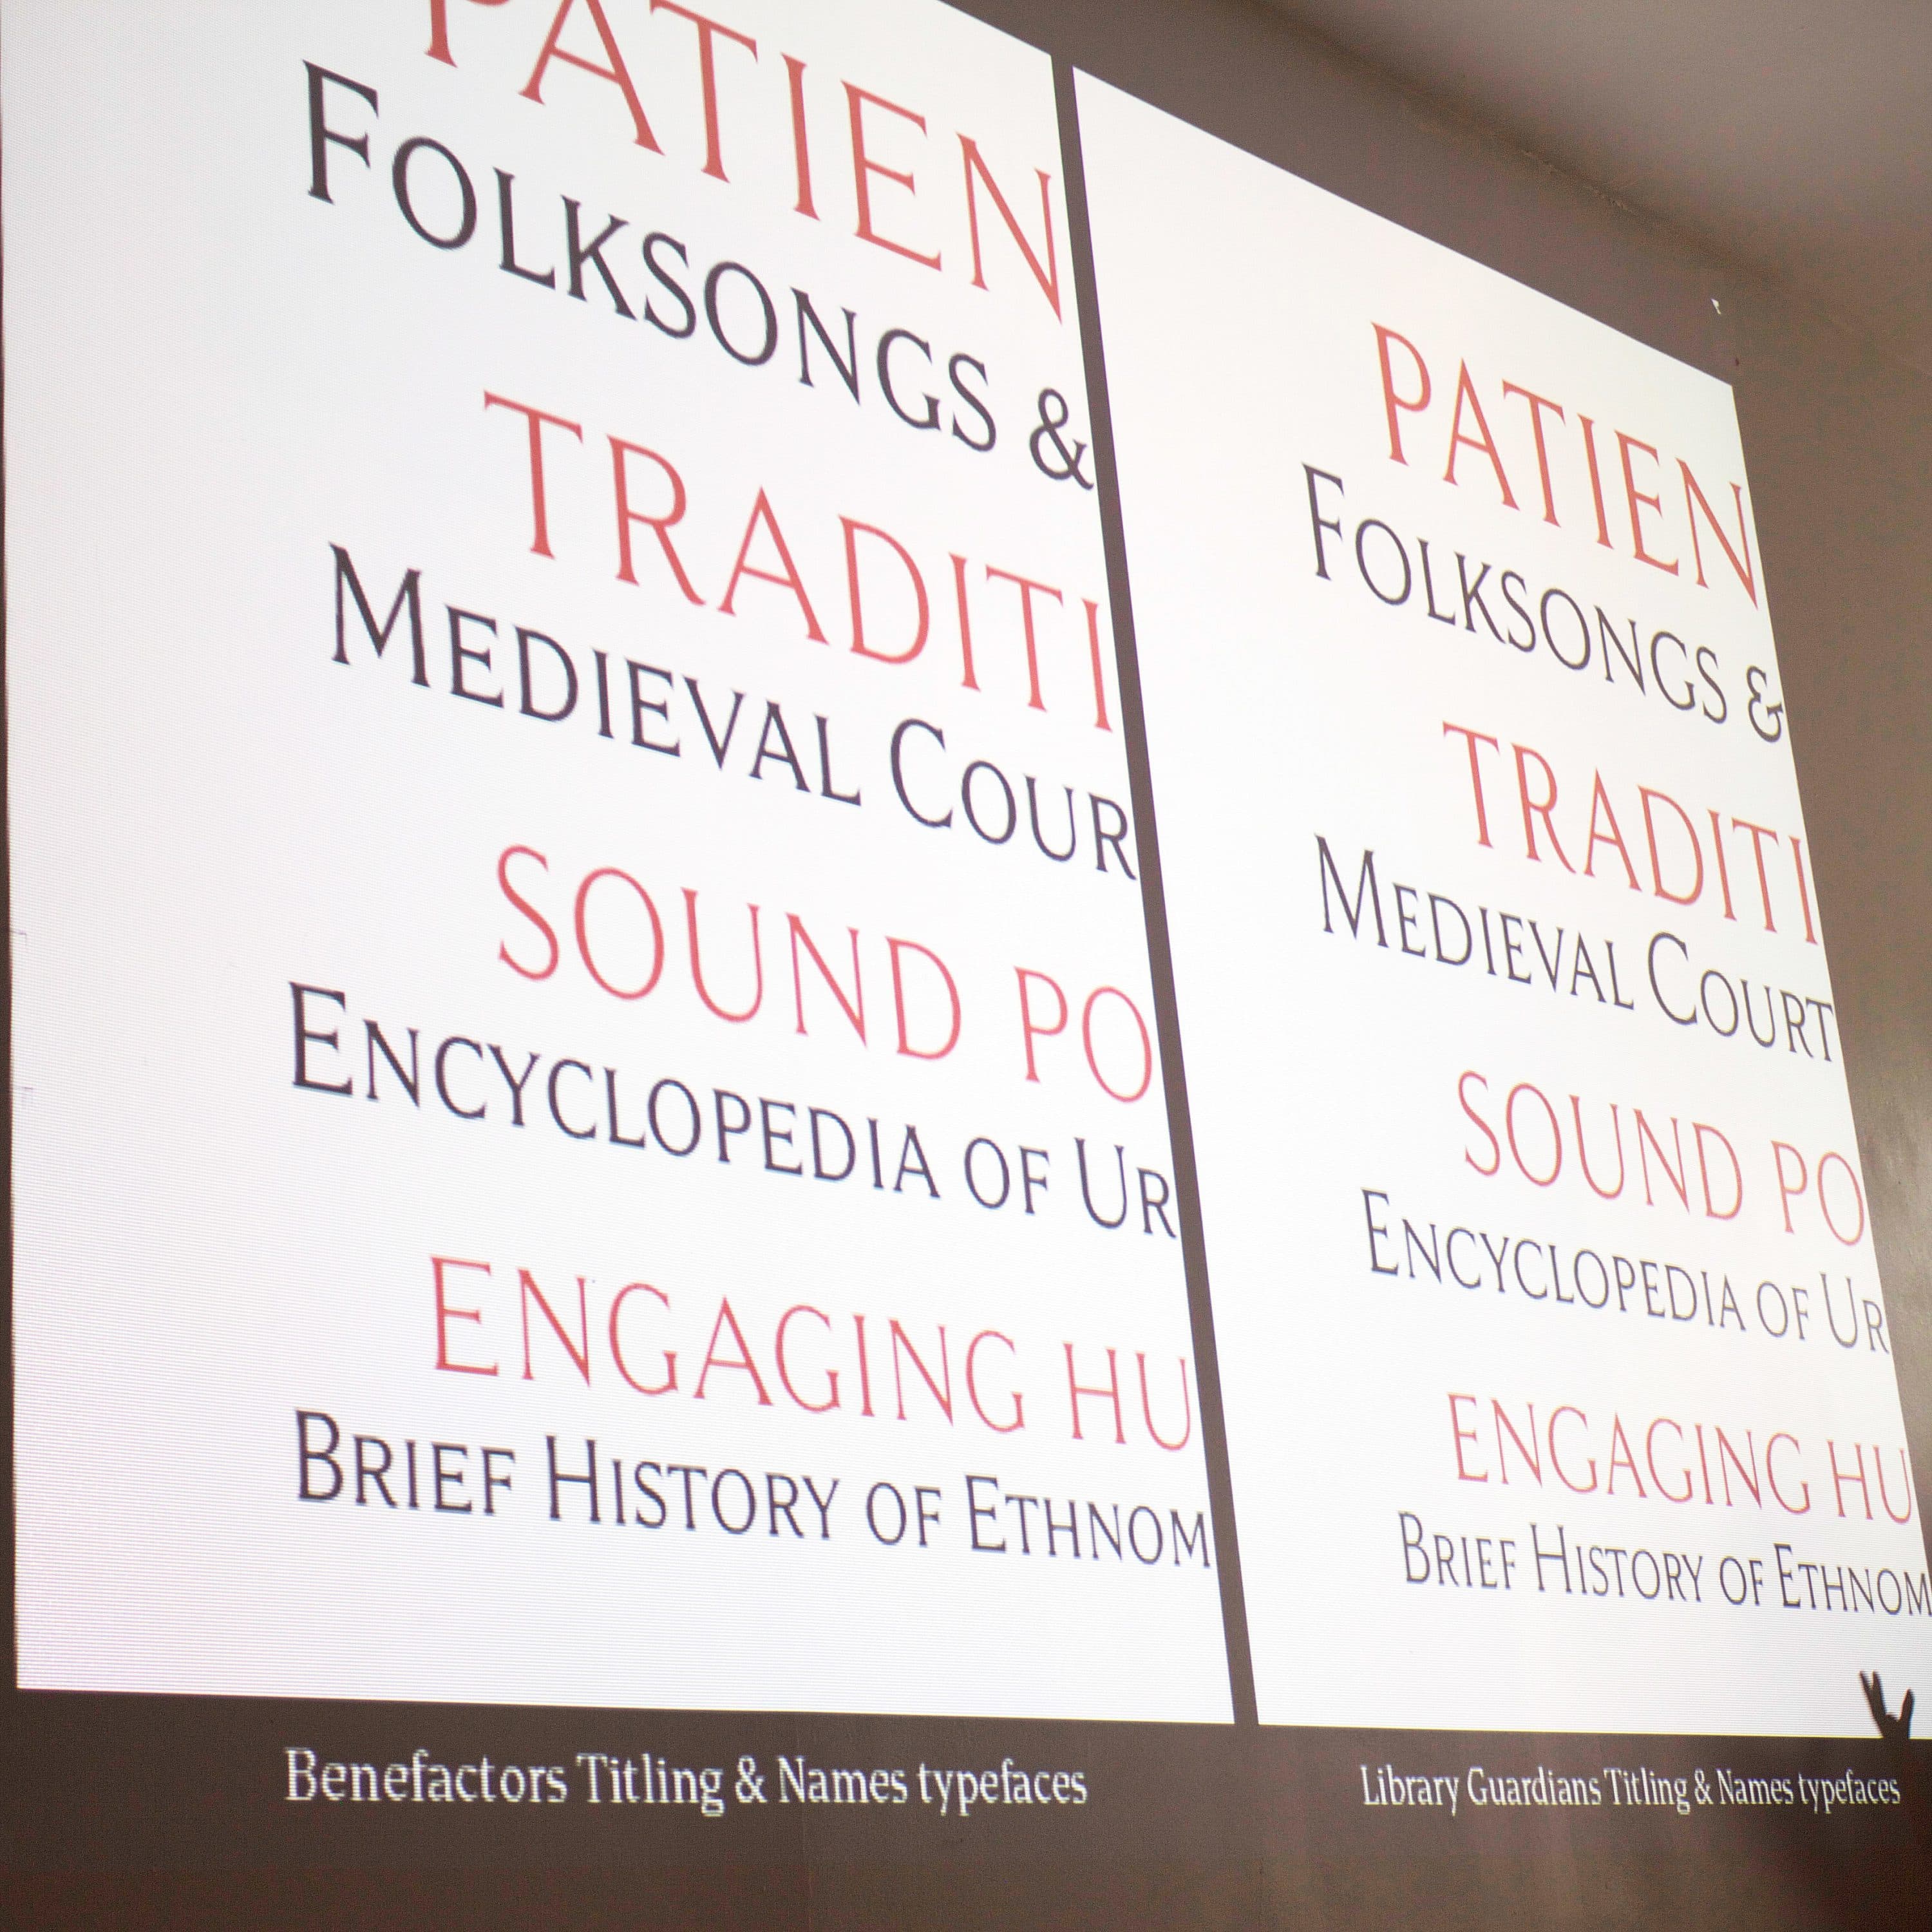 A person stands next to a large projected display showing a comparison of different typographies. The screen features various text phrases, with emphasis on the words "PATIENT," "TRADITIONS," and "ENGAGING HUM." The typefaces compared are "Benefactors Titling & Names" and "Literary Guardians Titling & Names.